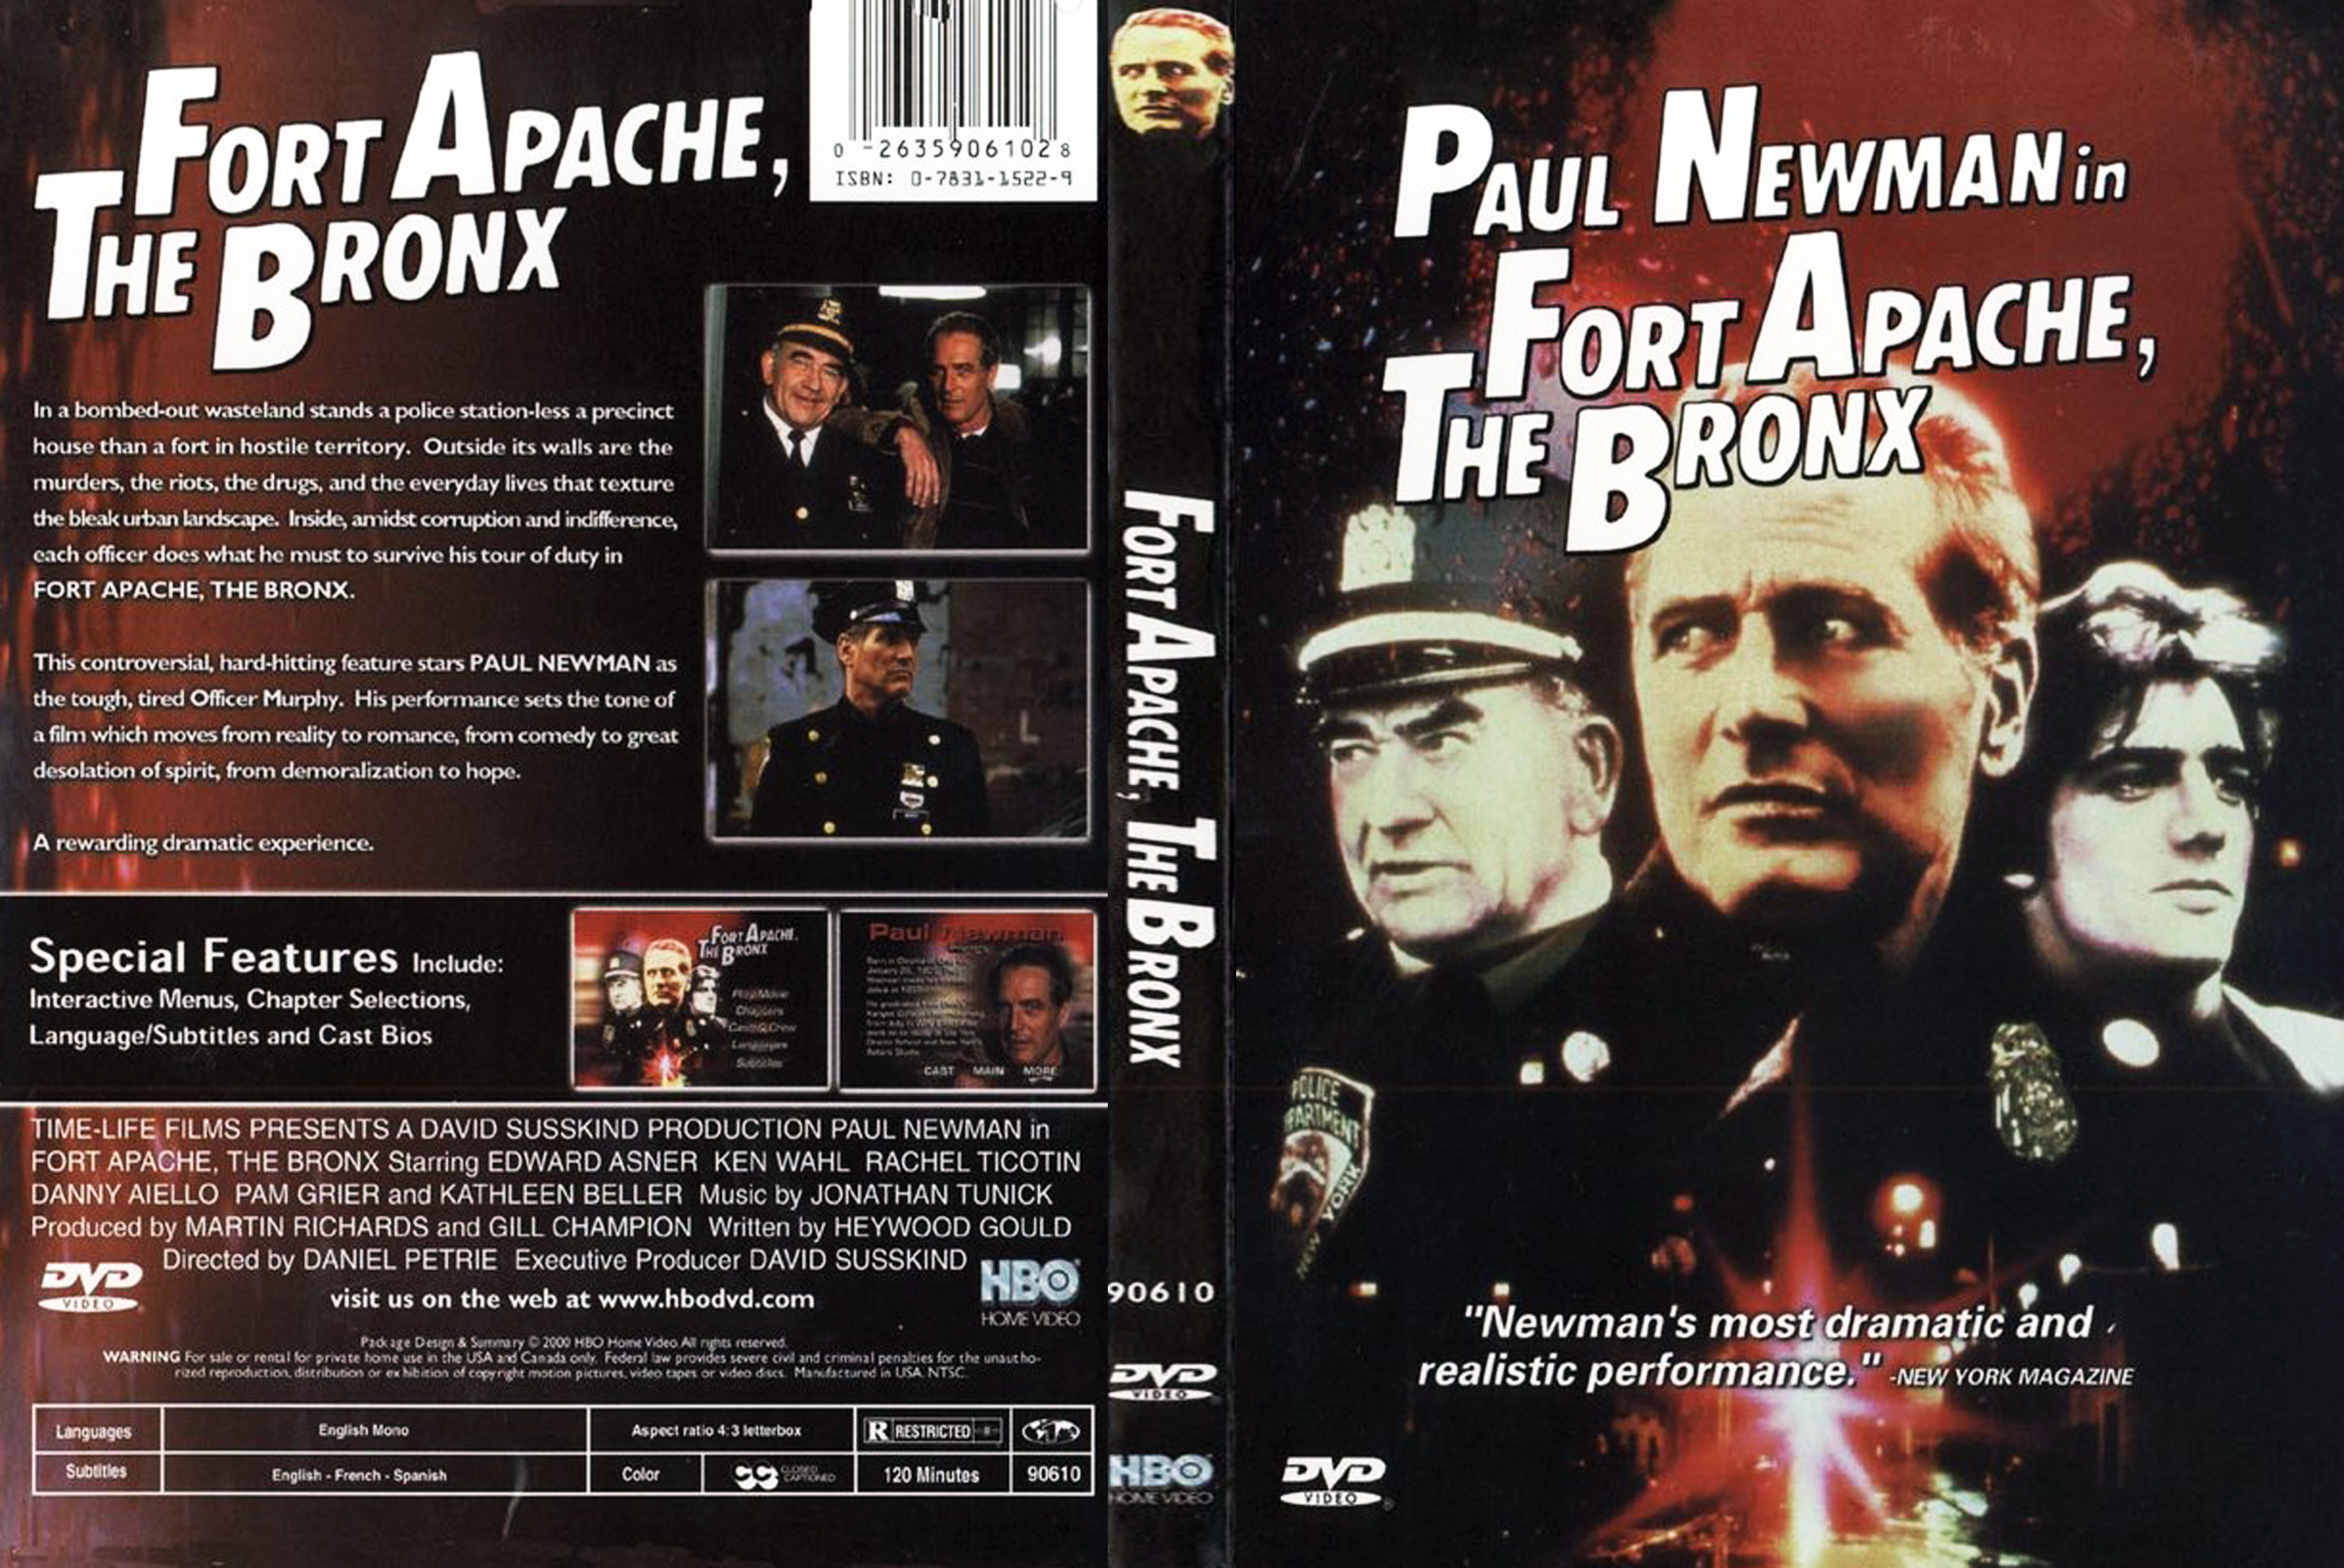 Jaquette DVD Fort apache the bronx